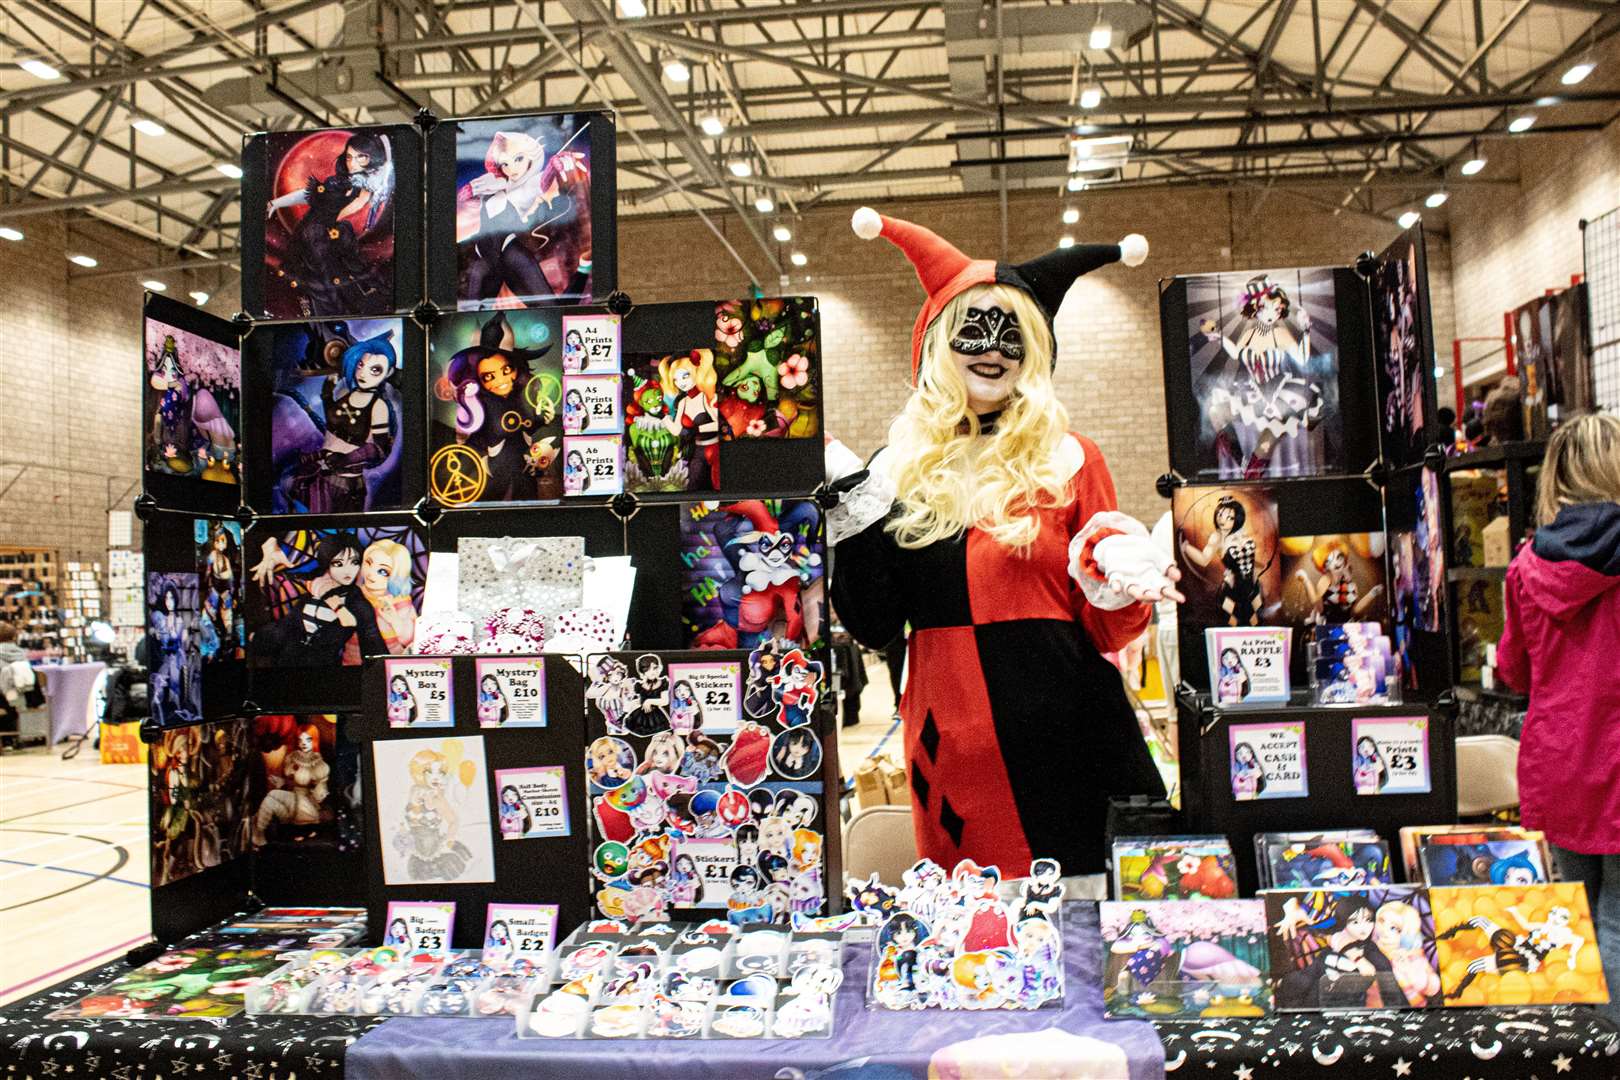 Clownetina was just one of many trade stand sellers at ComiCon. Photo: Niall Harkiss